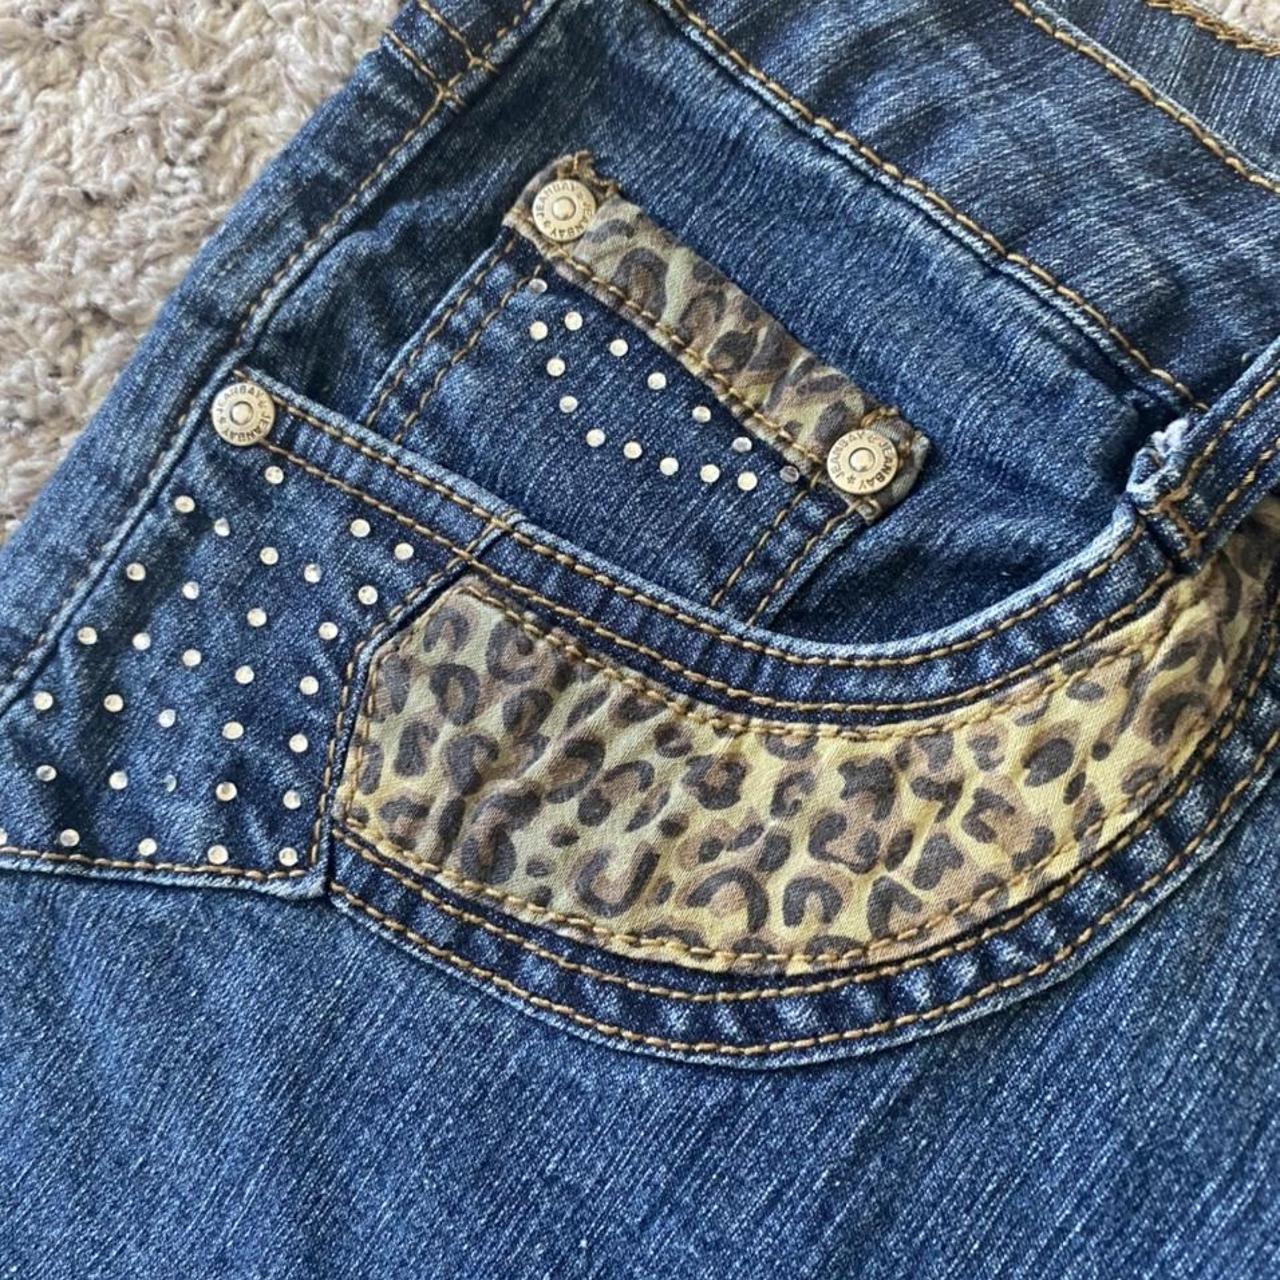 Women's Navy and Brown Jeans (2)